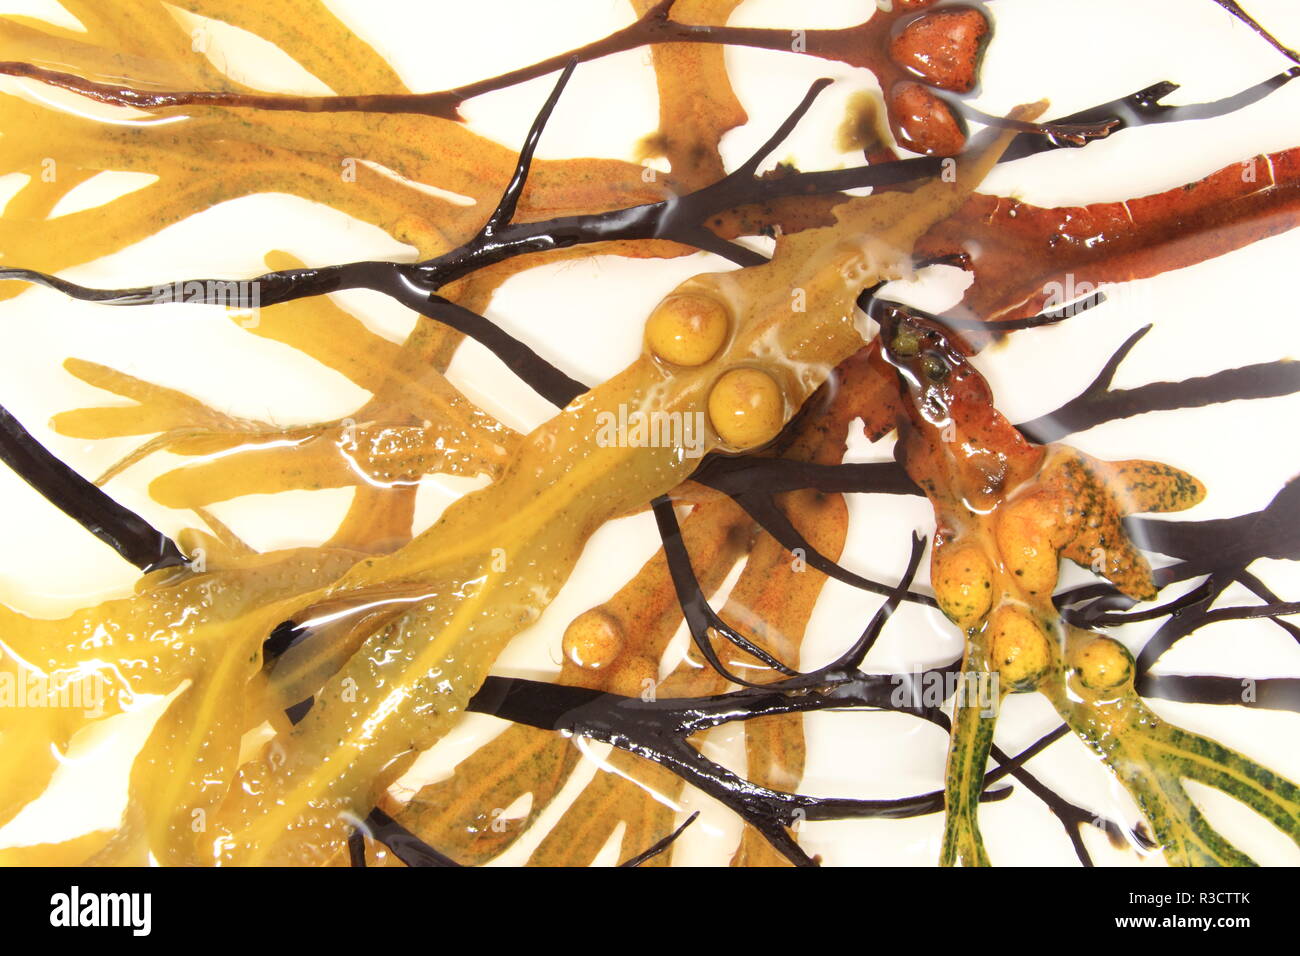 different brown seaweeds and other algae Stock Photo